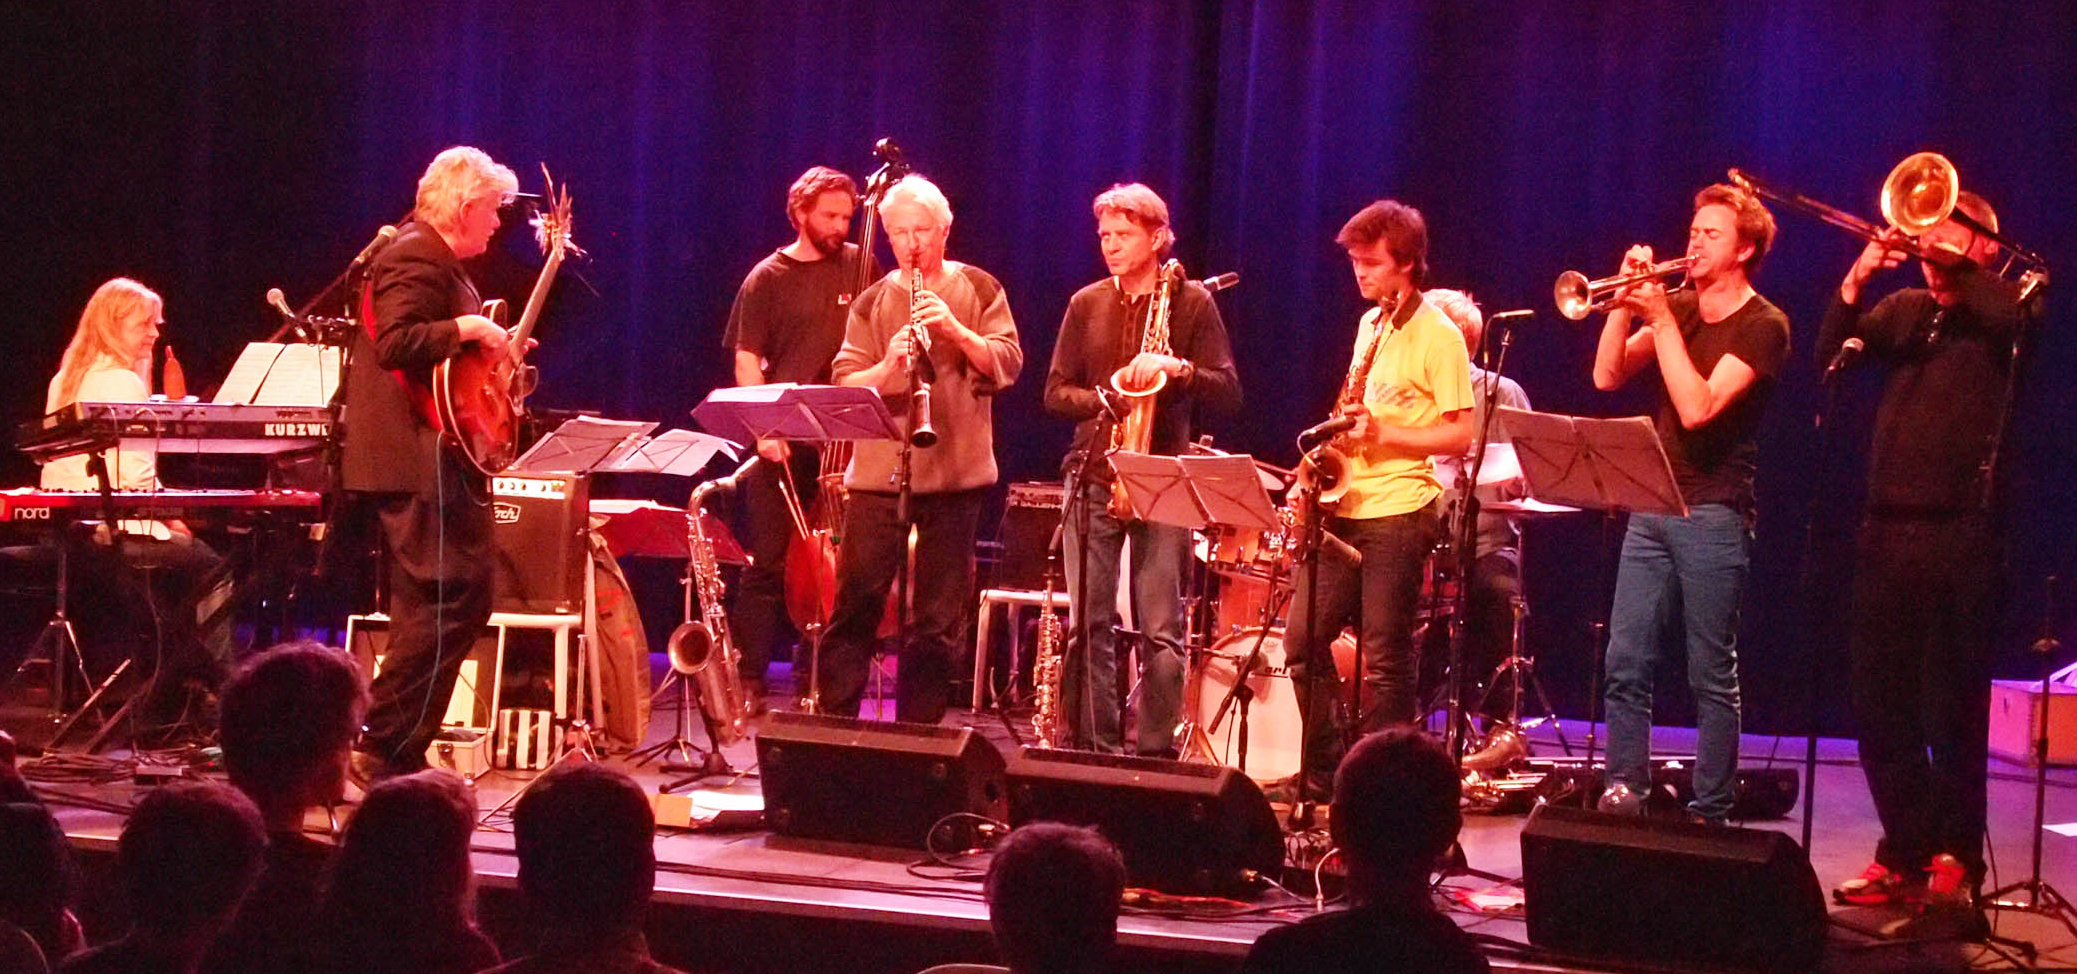 Pierre Dørge & New Jungle Orchestra